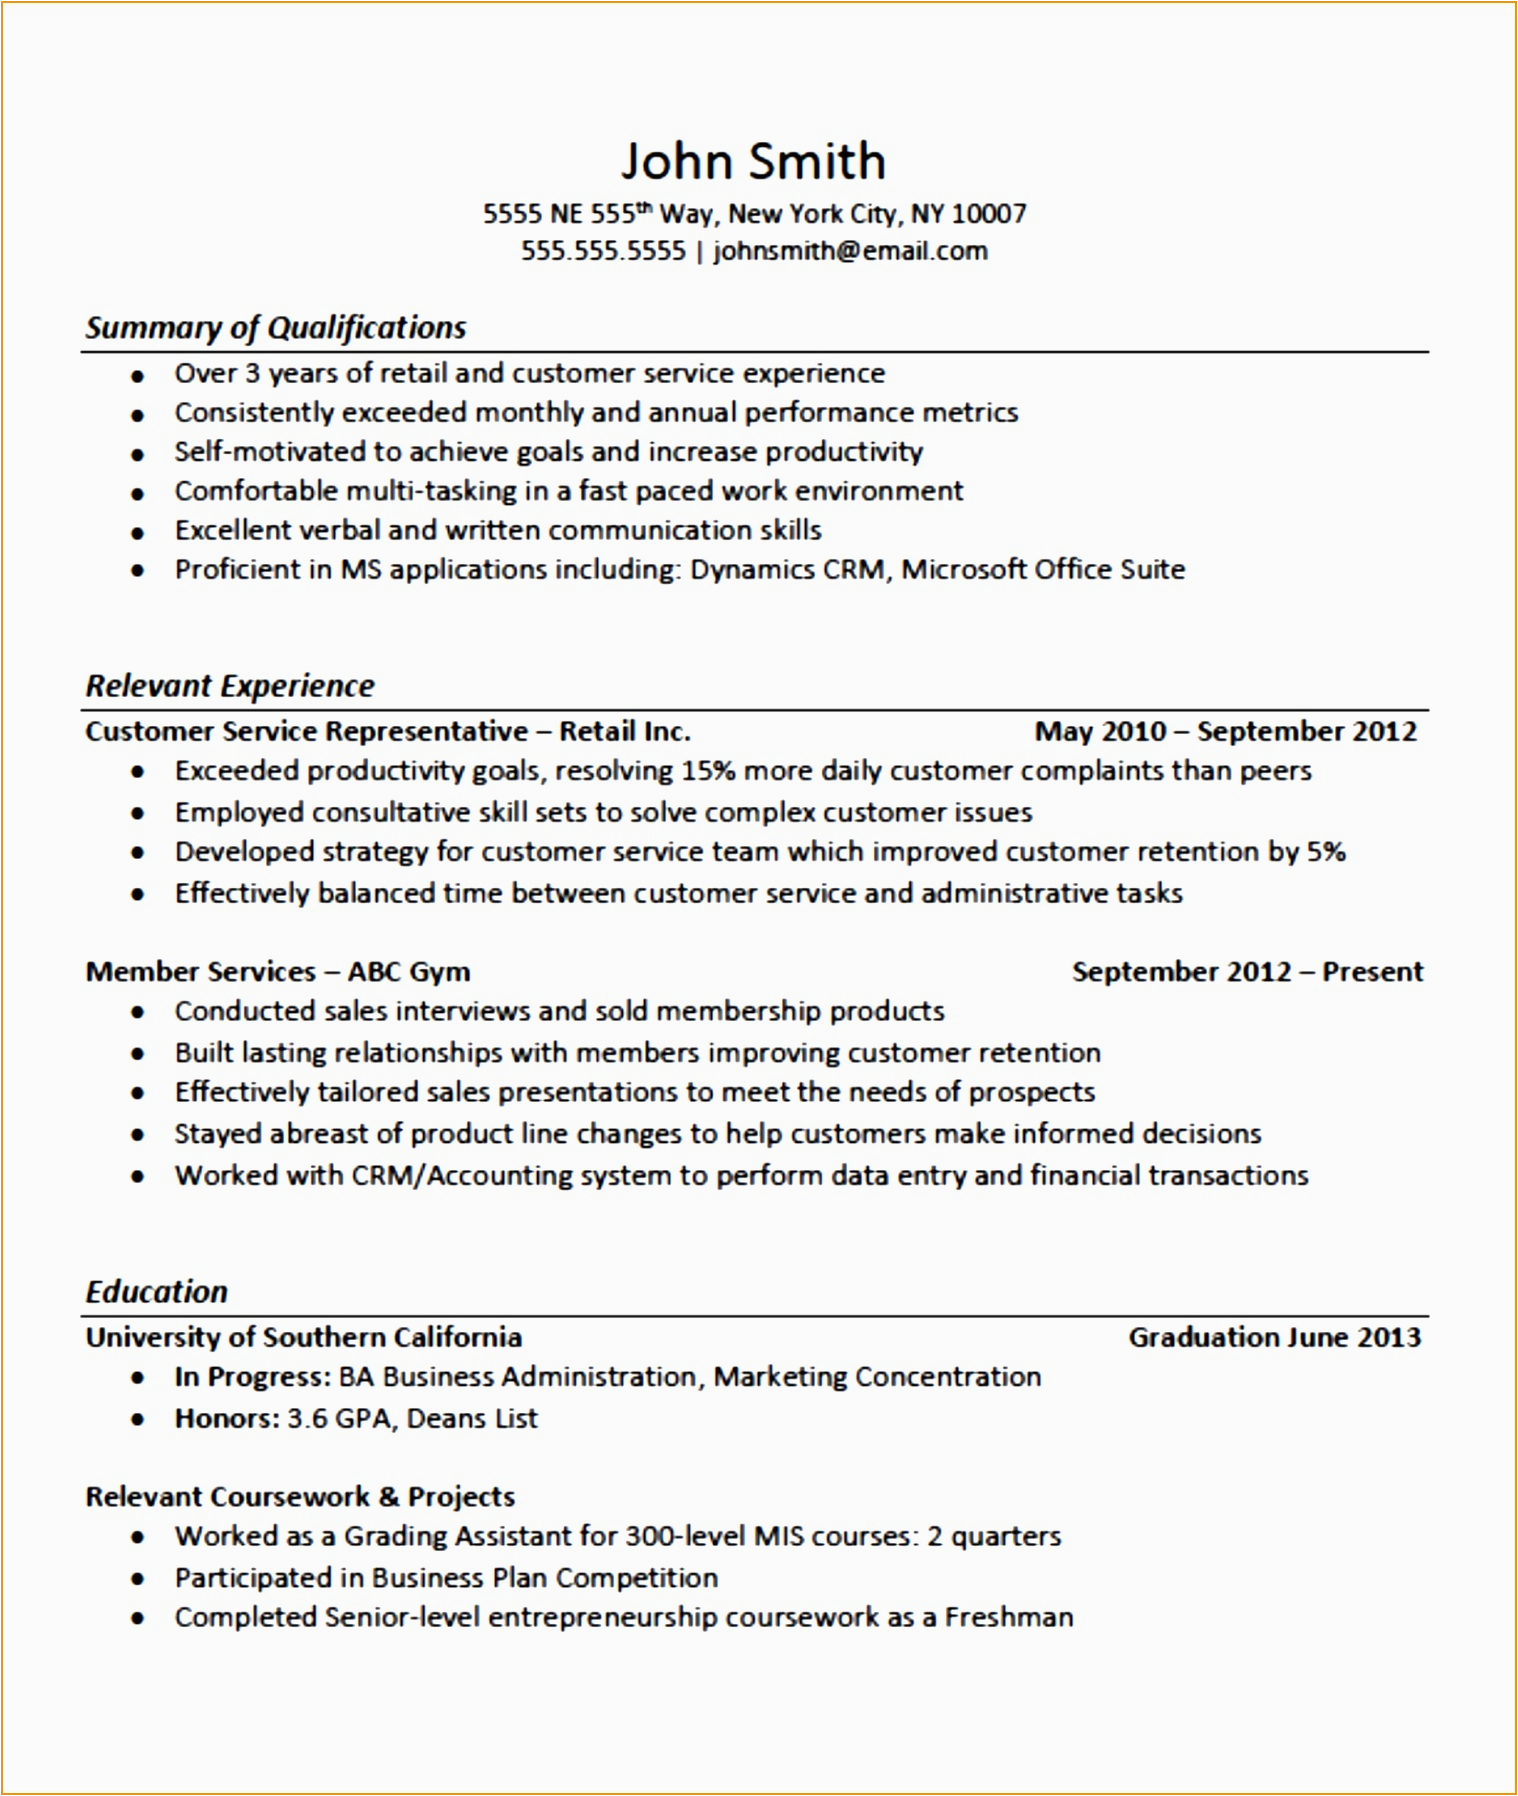 Sample Of A Resume with Work Experience 7 Resume Builder No Work Experience